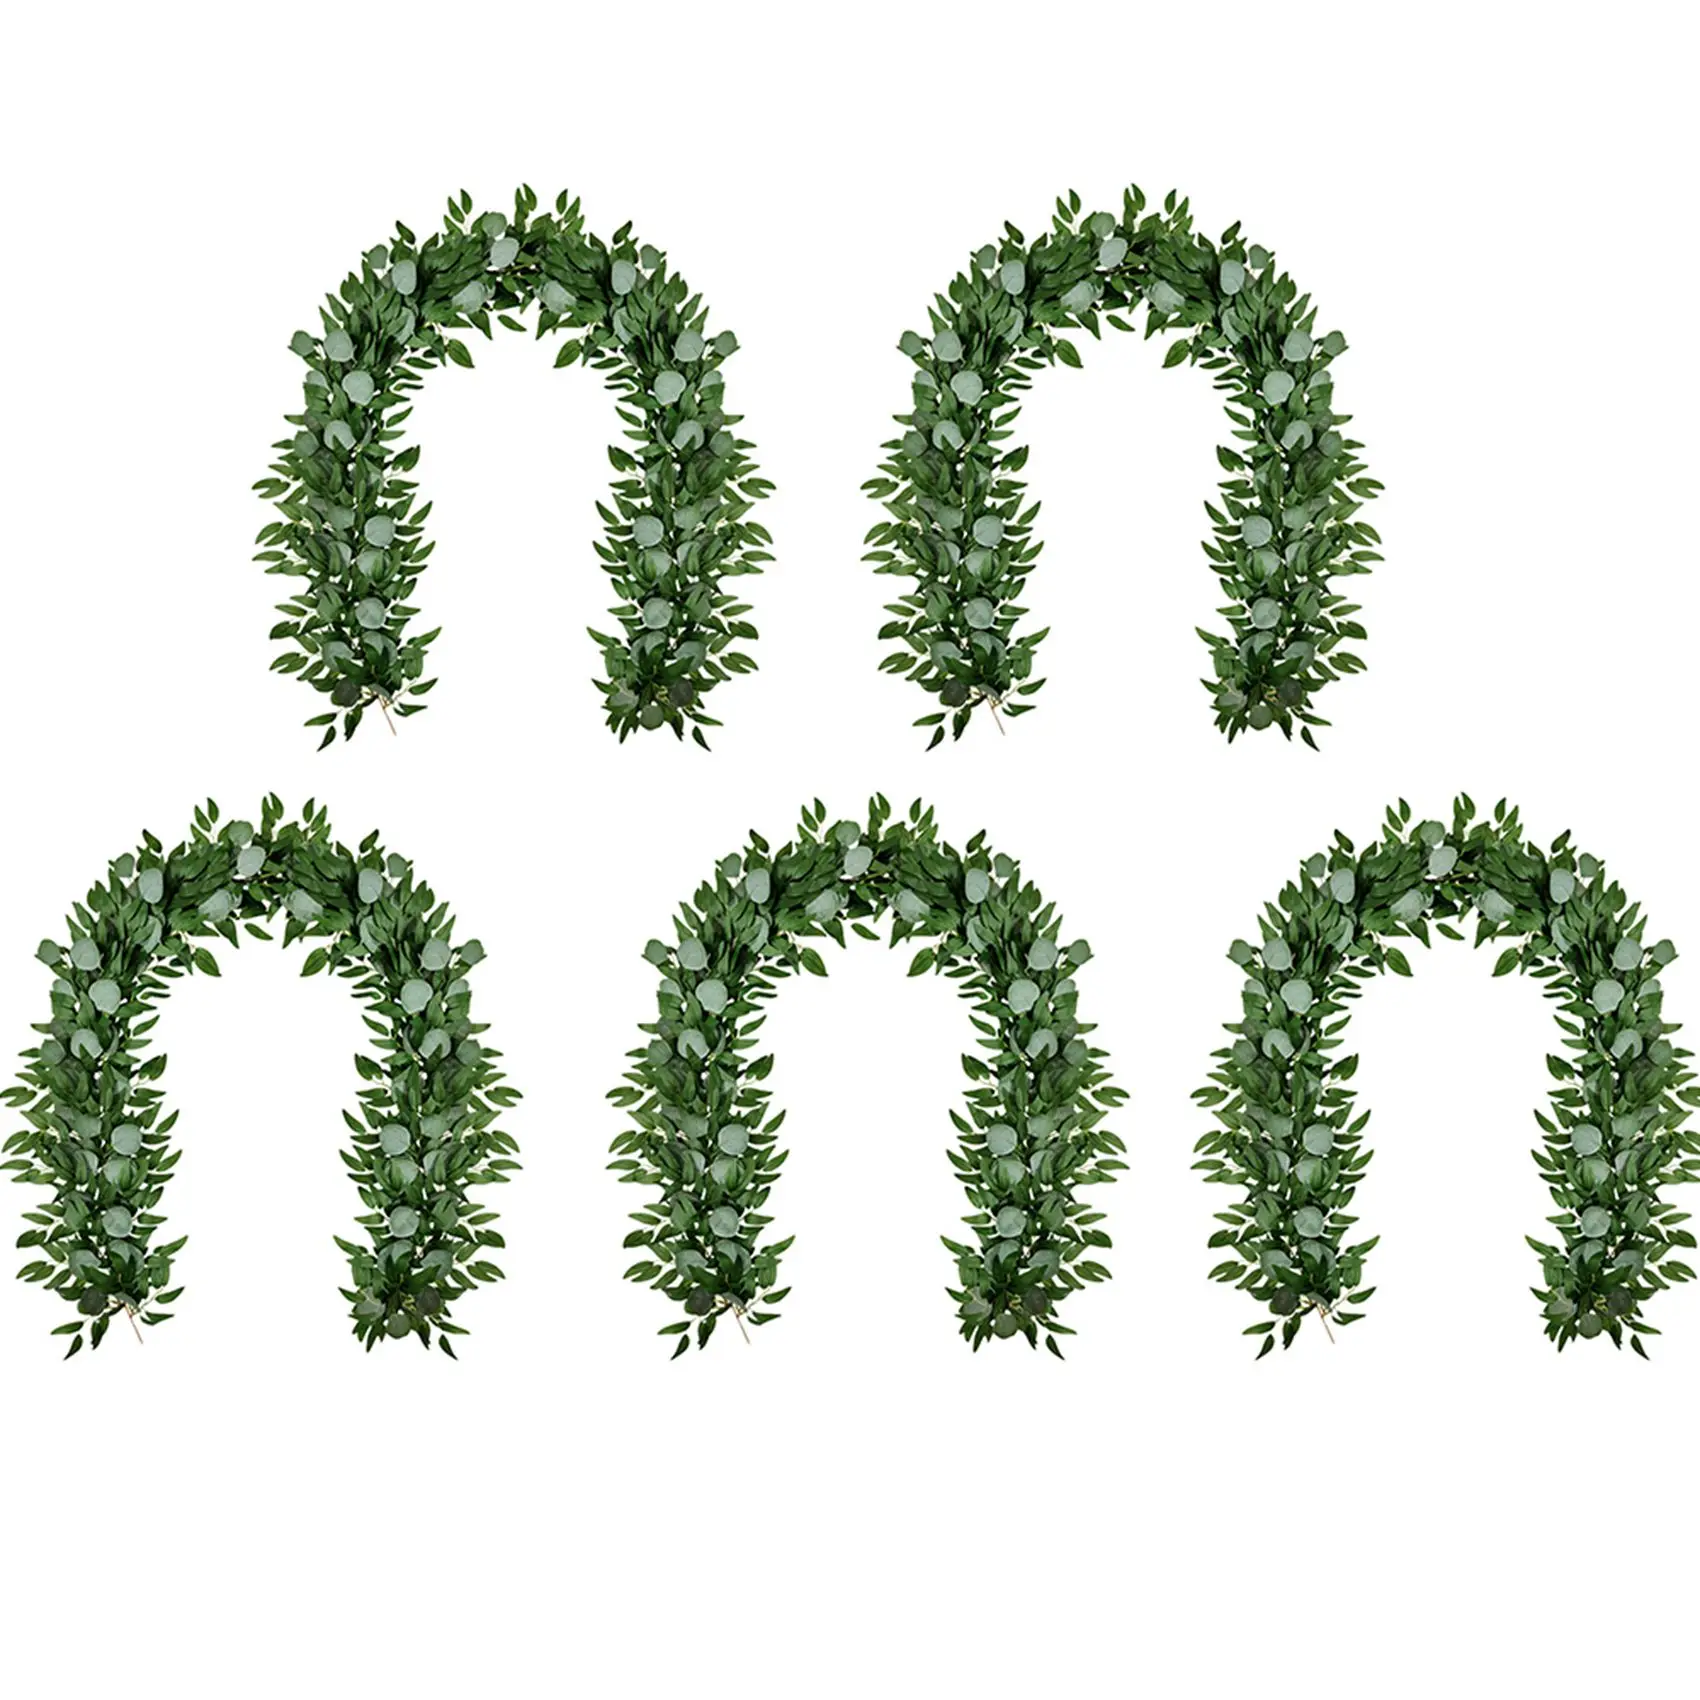 

5X Artificial Eucalyptus and Willow Vines Faux Garland Ivy for Wedding Backdrop Arch Wall Decor Table Runner Vine